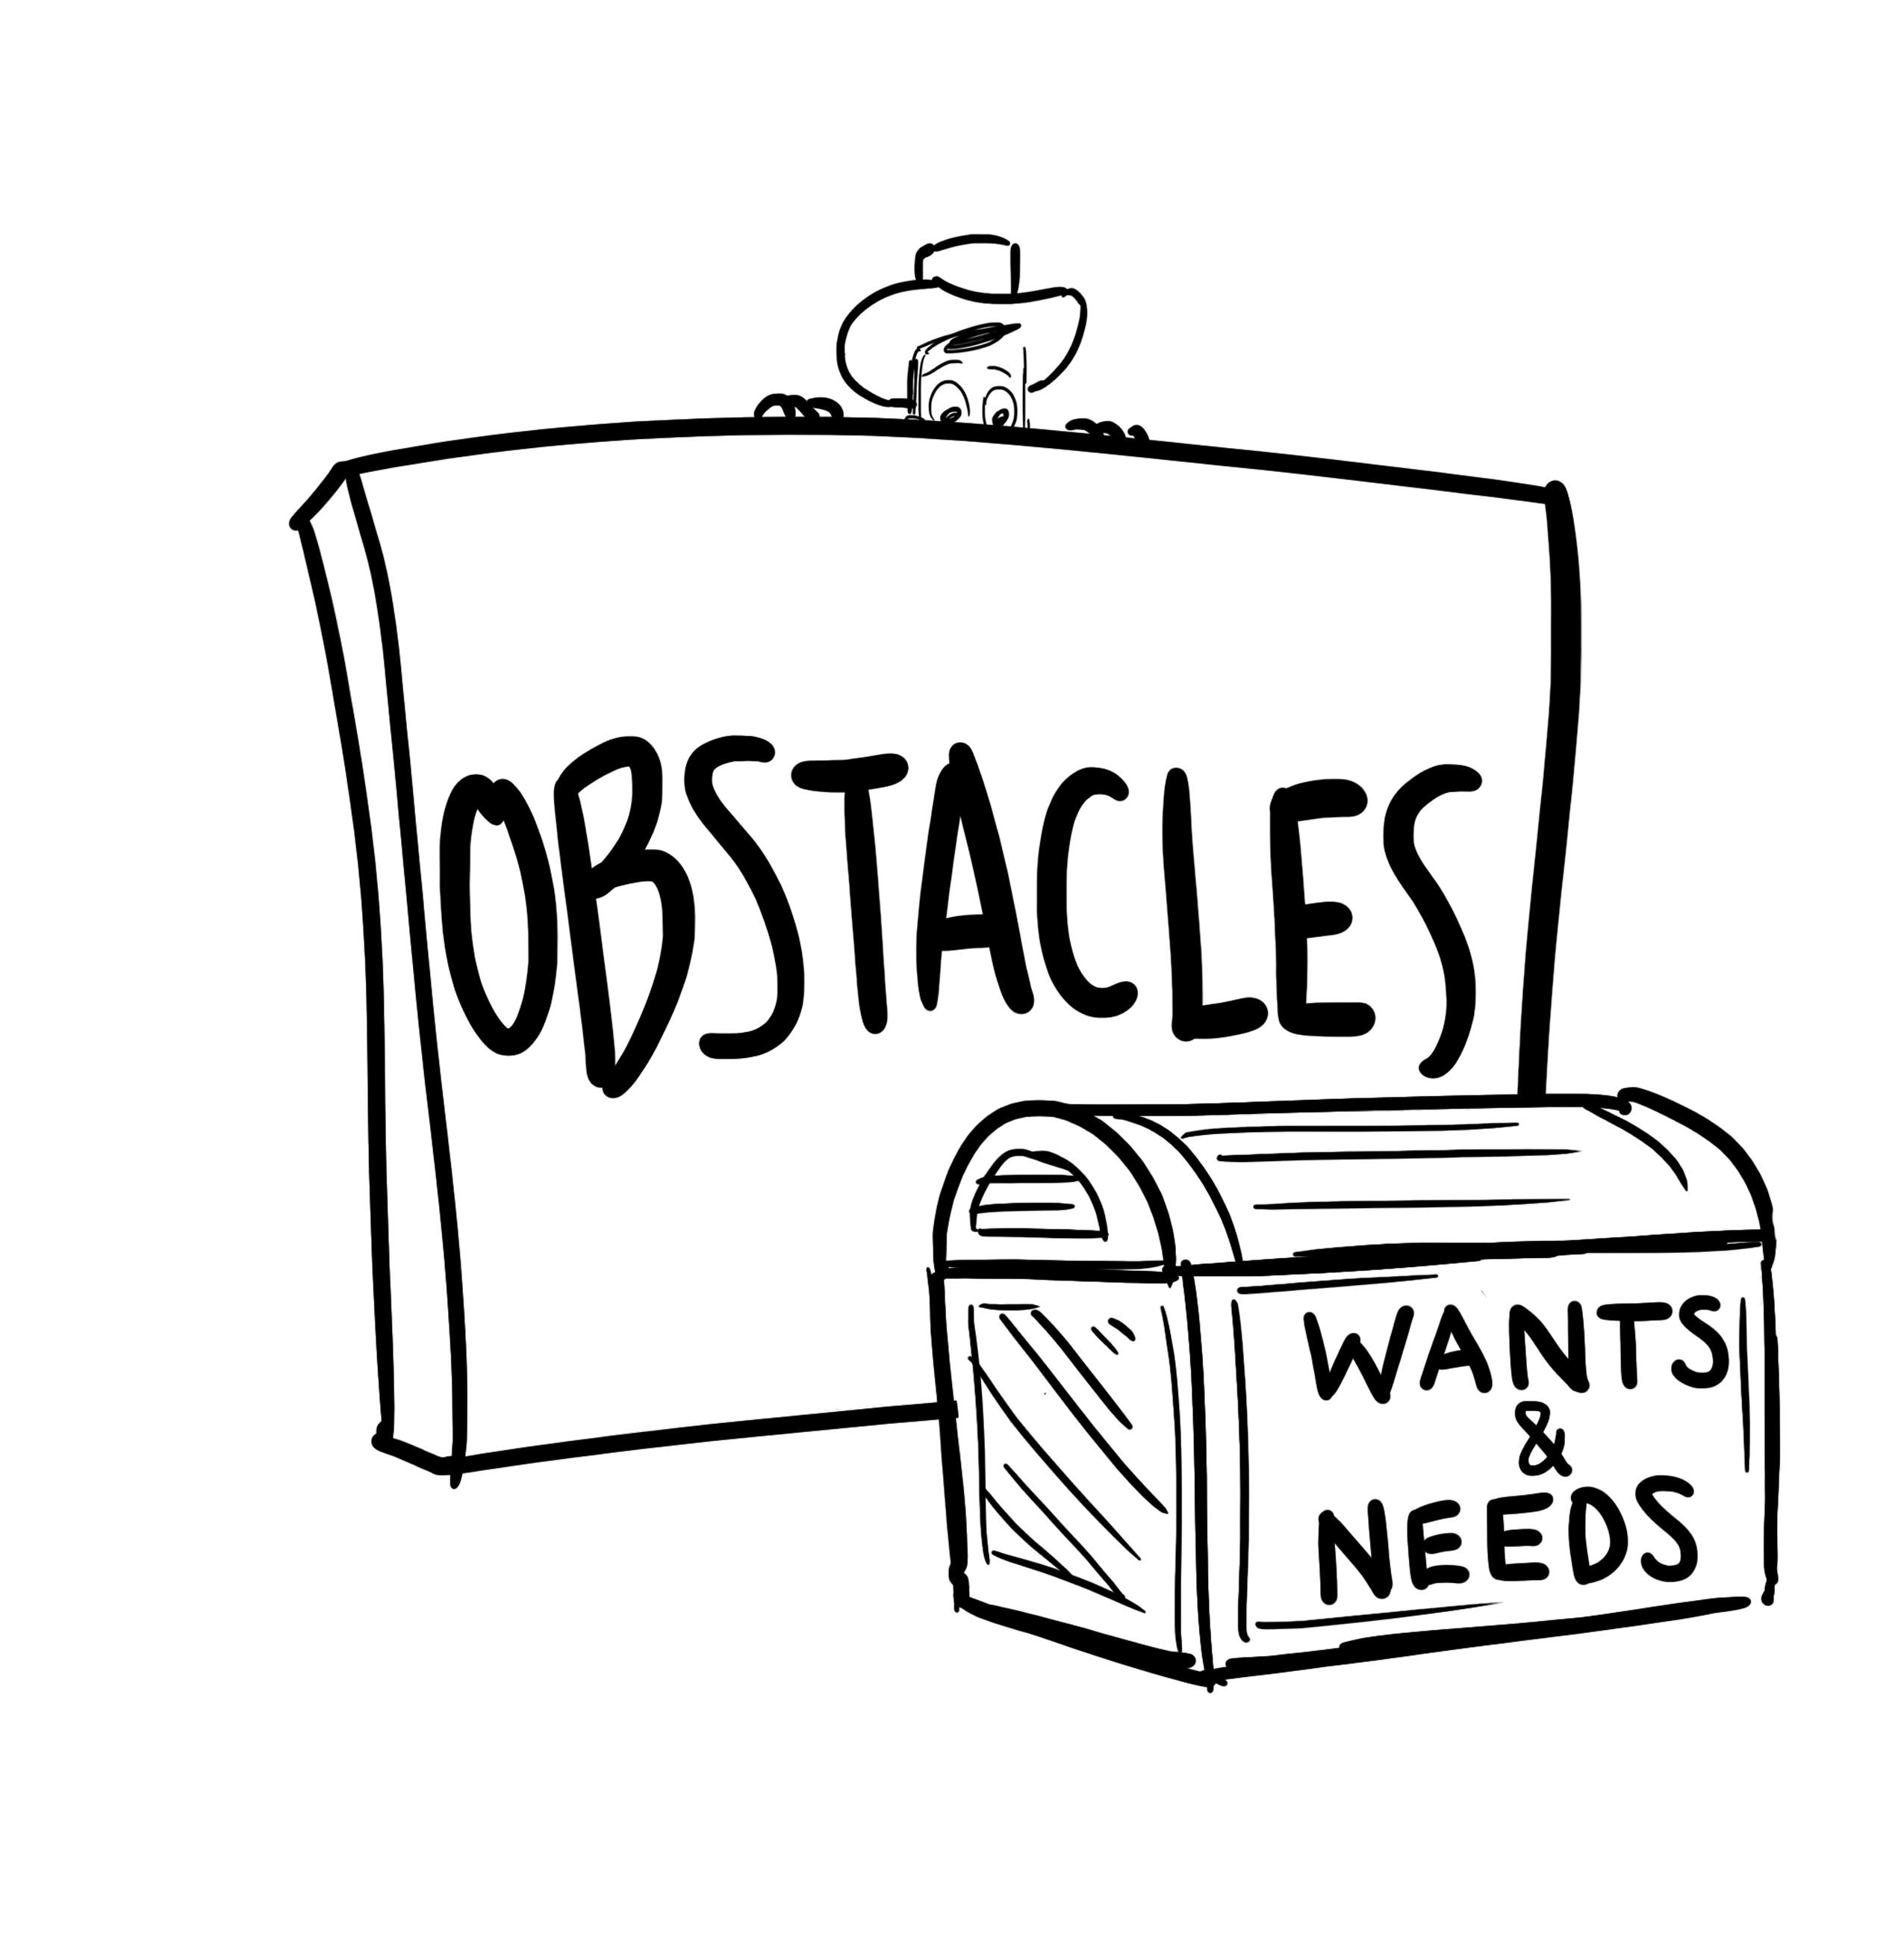 Illustration of a cowboy peeking over a giant wall labeled "Obstacles" and peering at a treasure chest labeled "Wants & needs" on the other side.